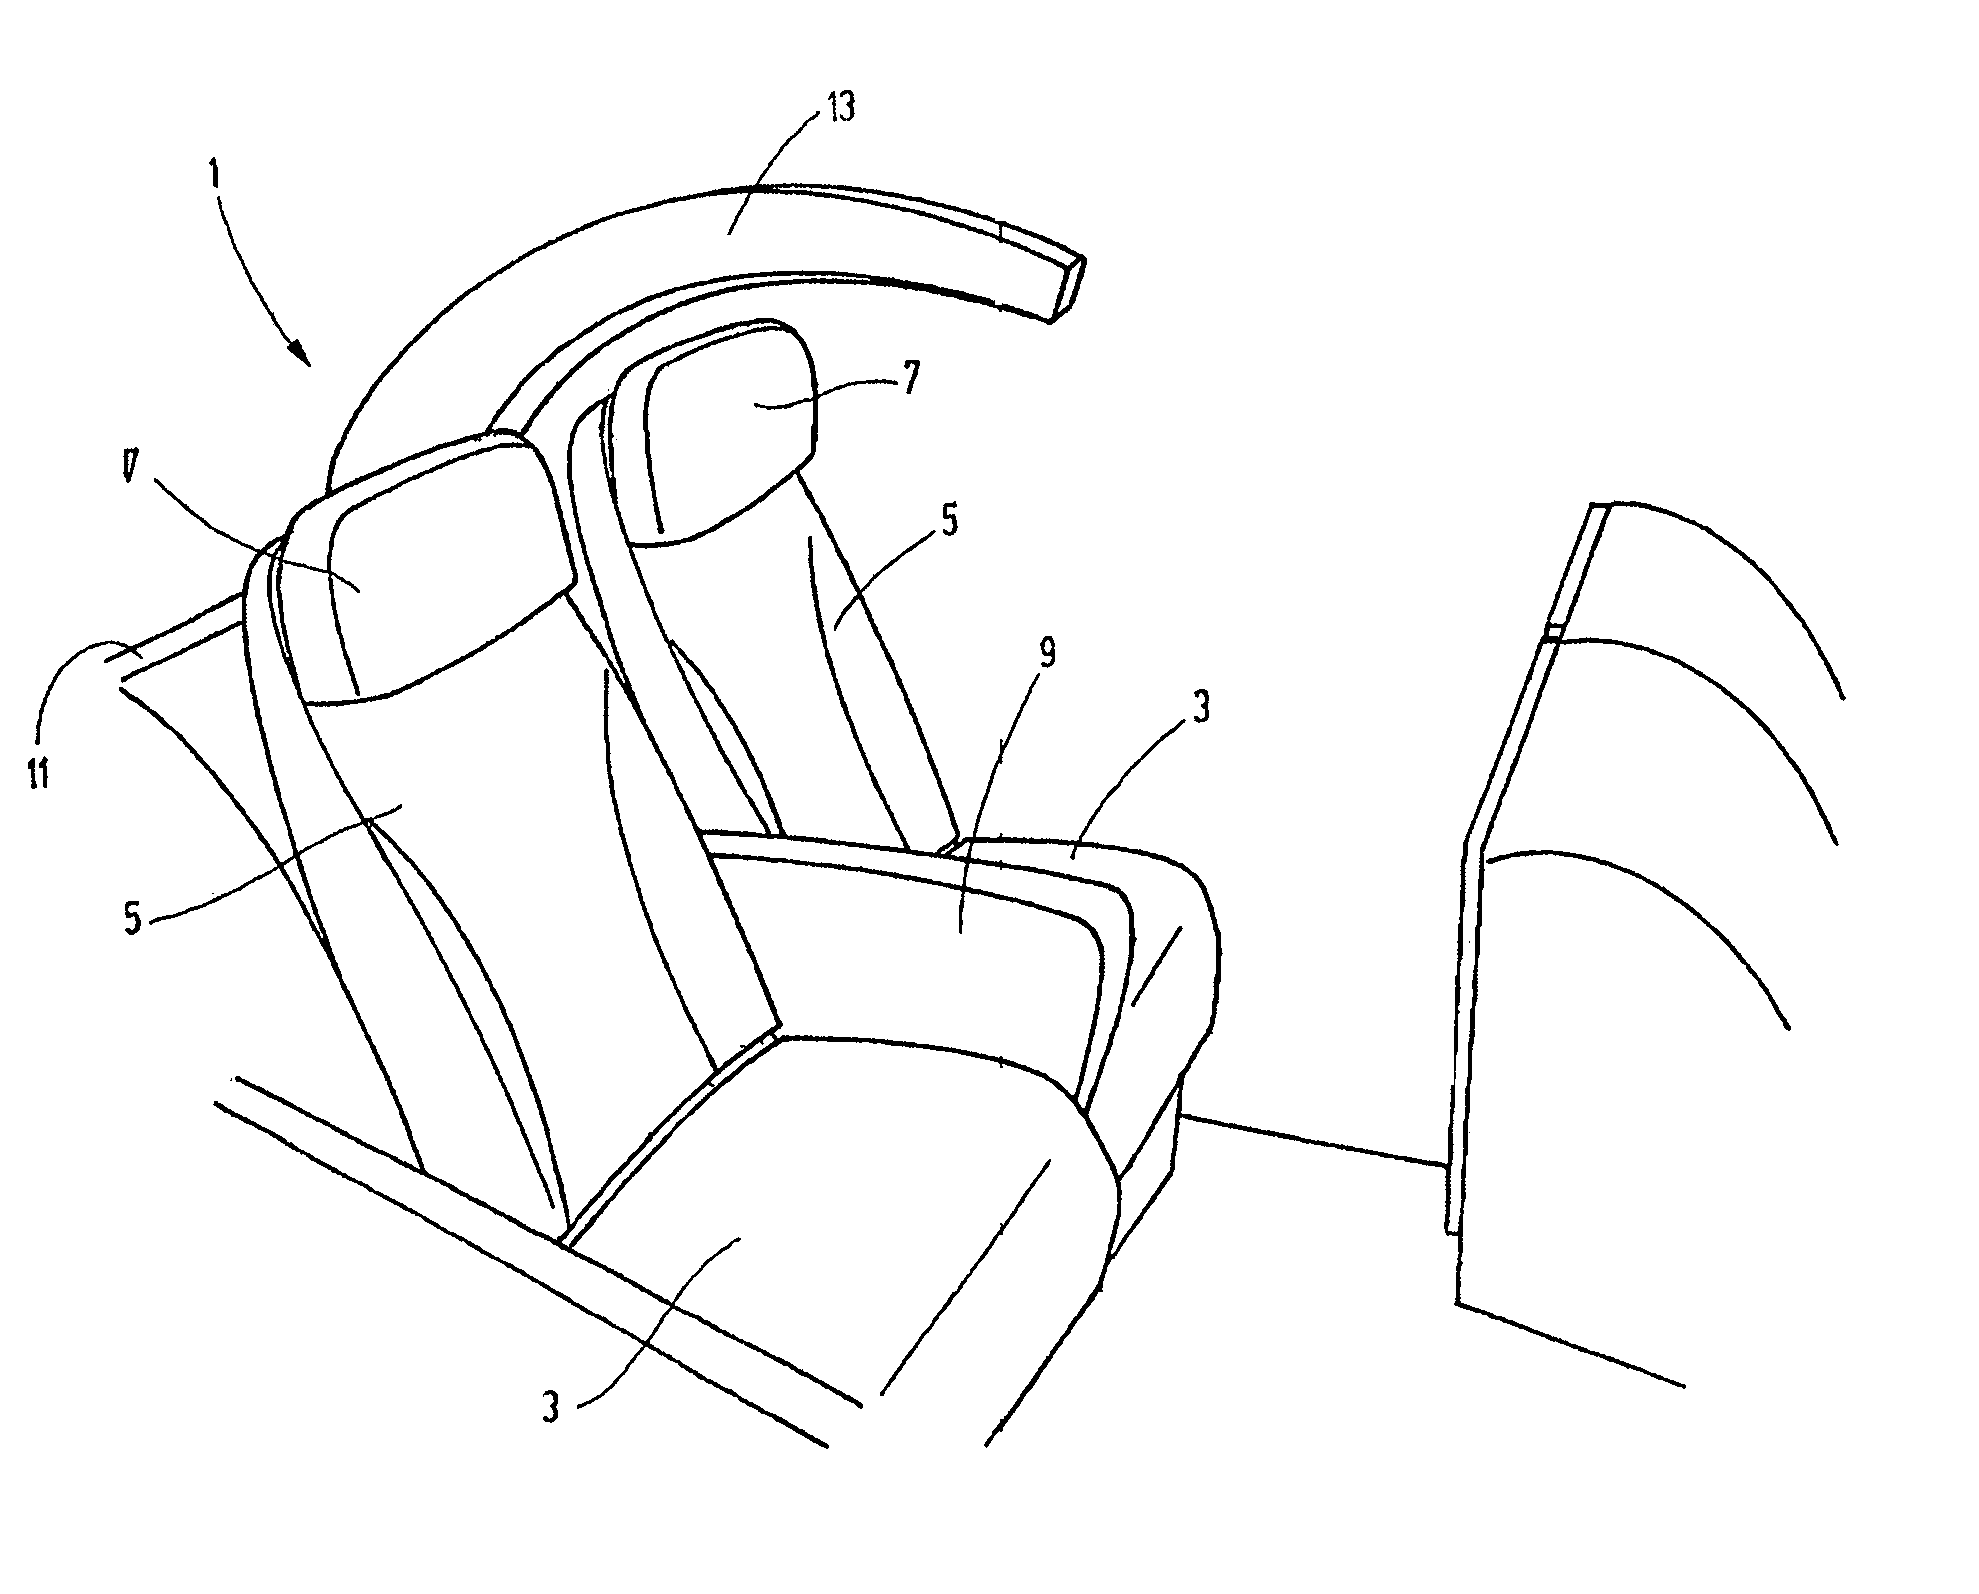 Vehicle seat system, especially for aircraft